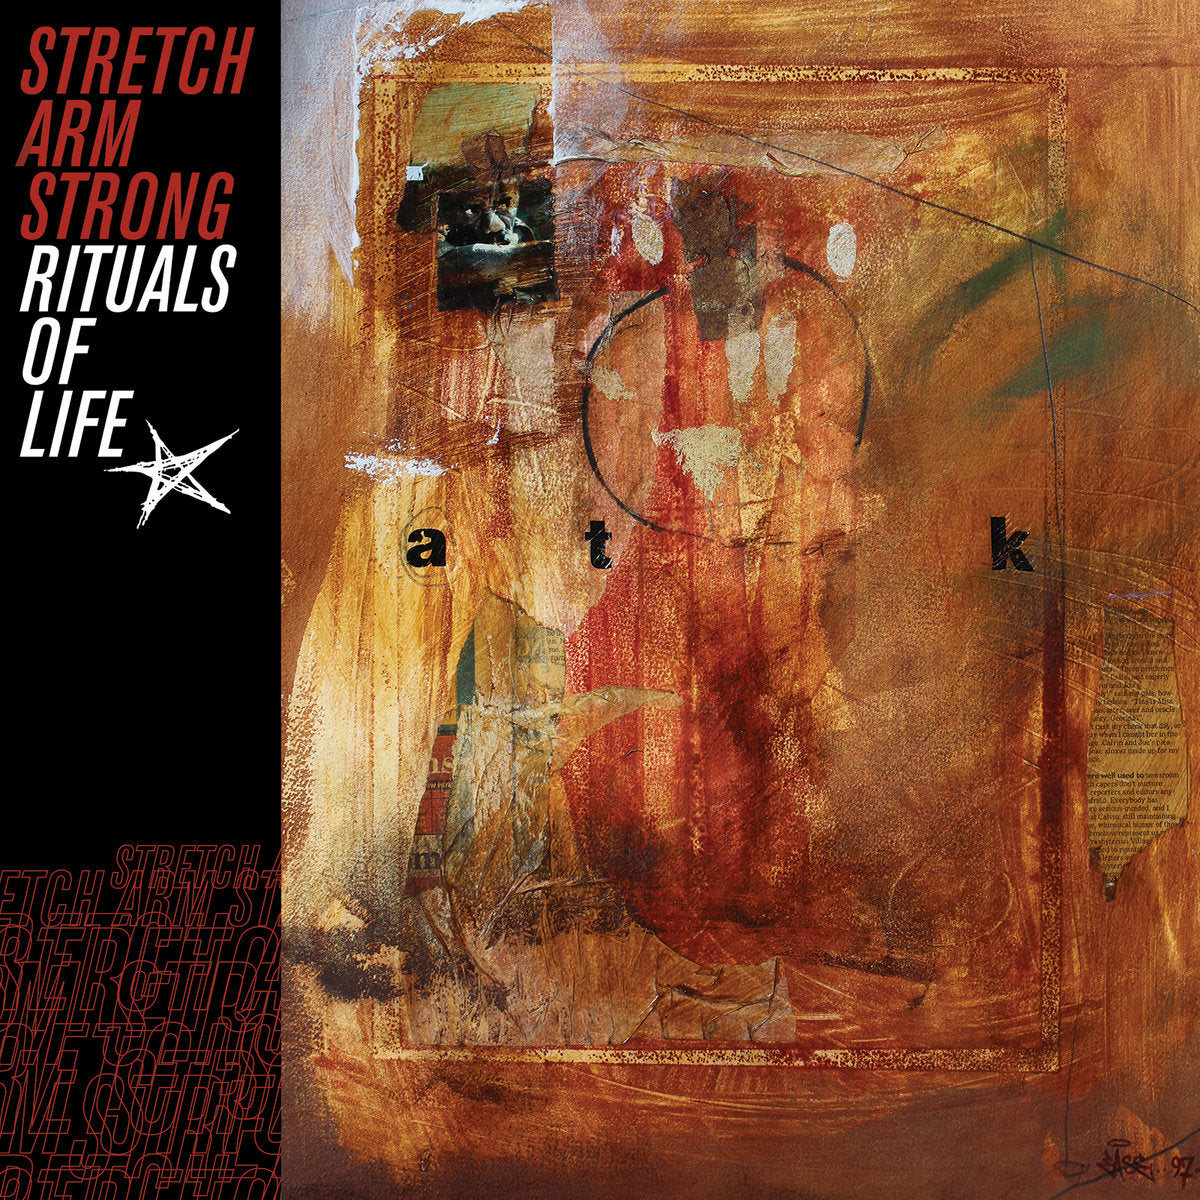 Stretch Armstrong "Rituals of Life" 12" Vinyl